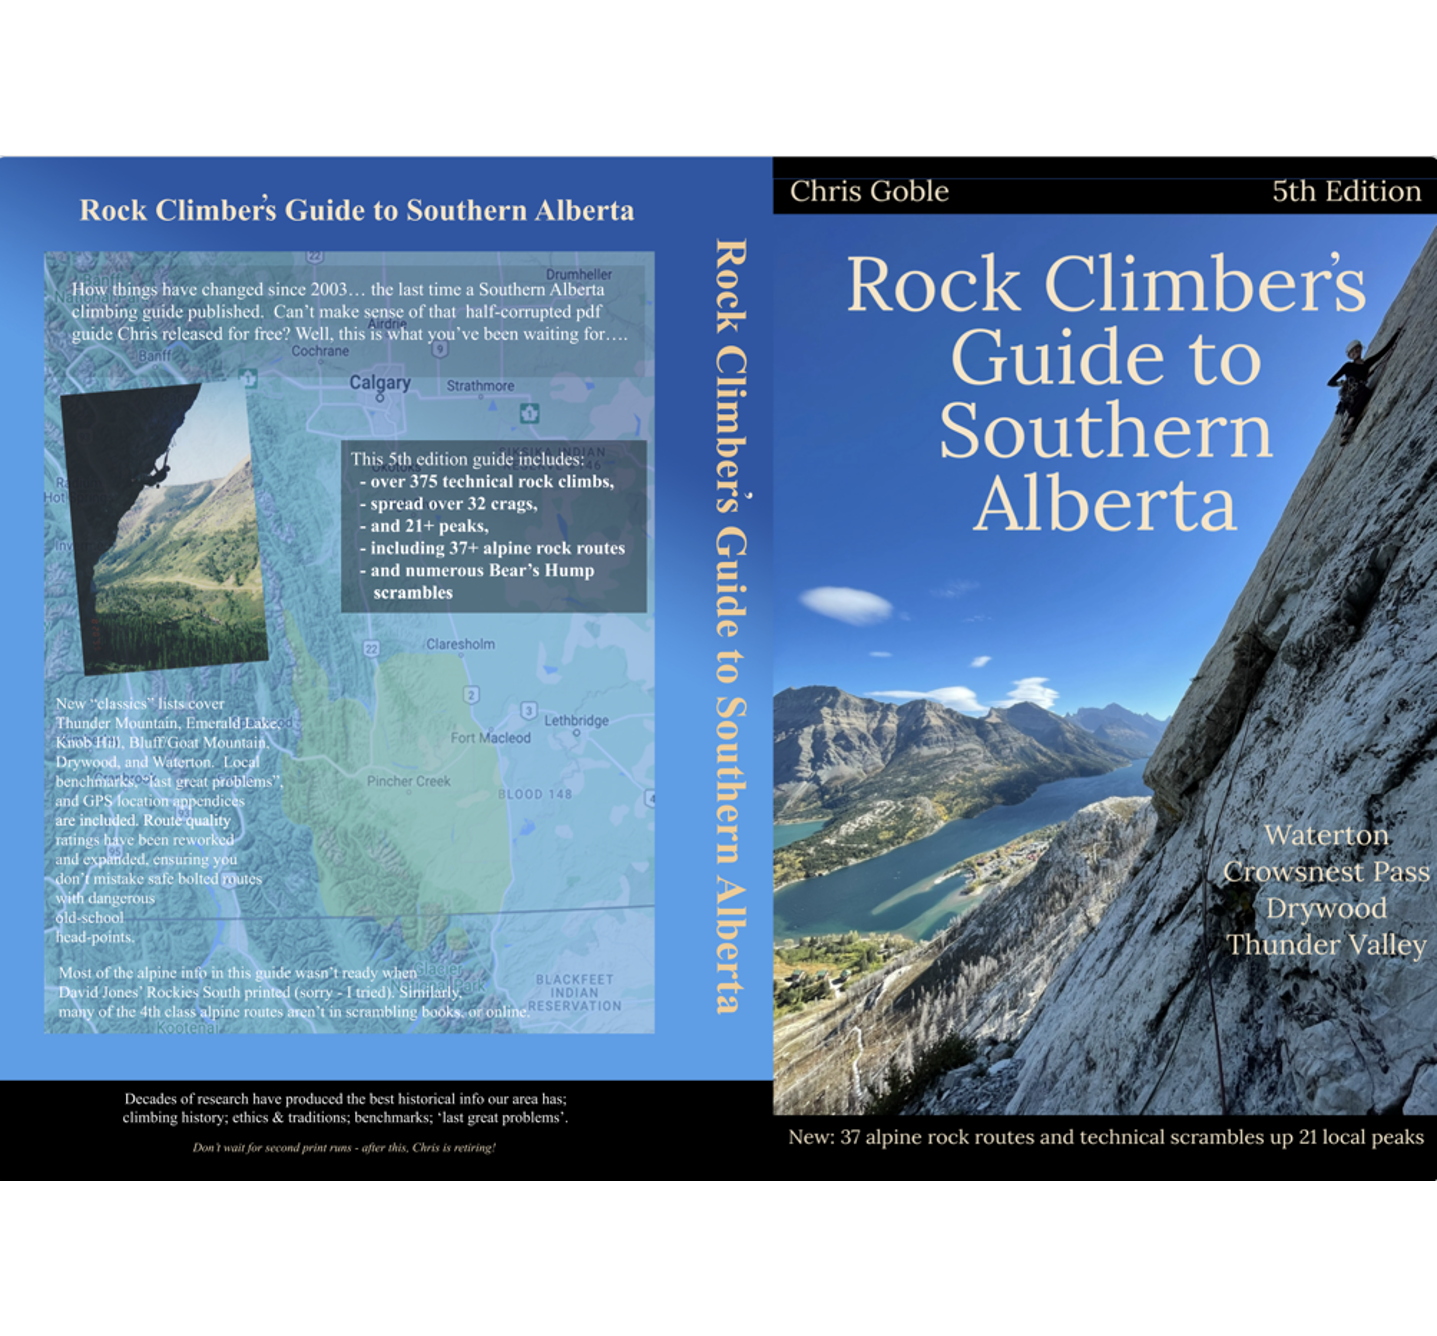 Rock Climber's Guide to Southern Alberta, 5th Edition